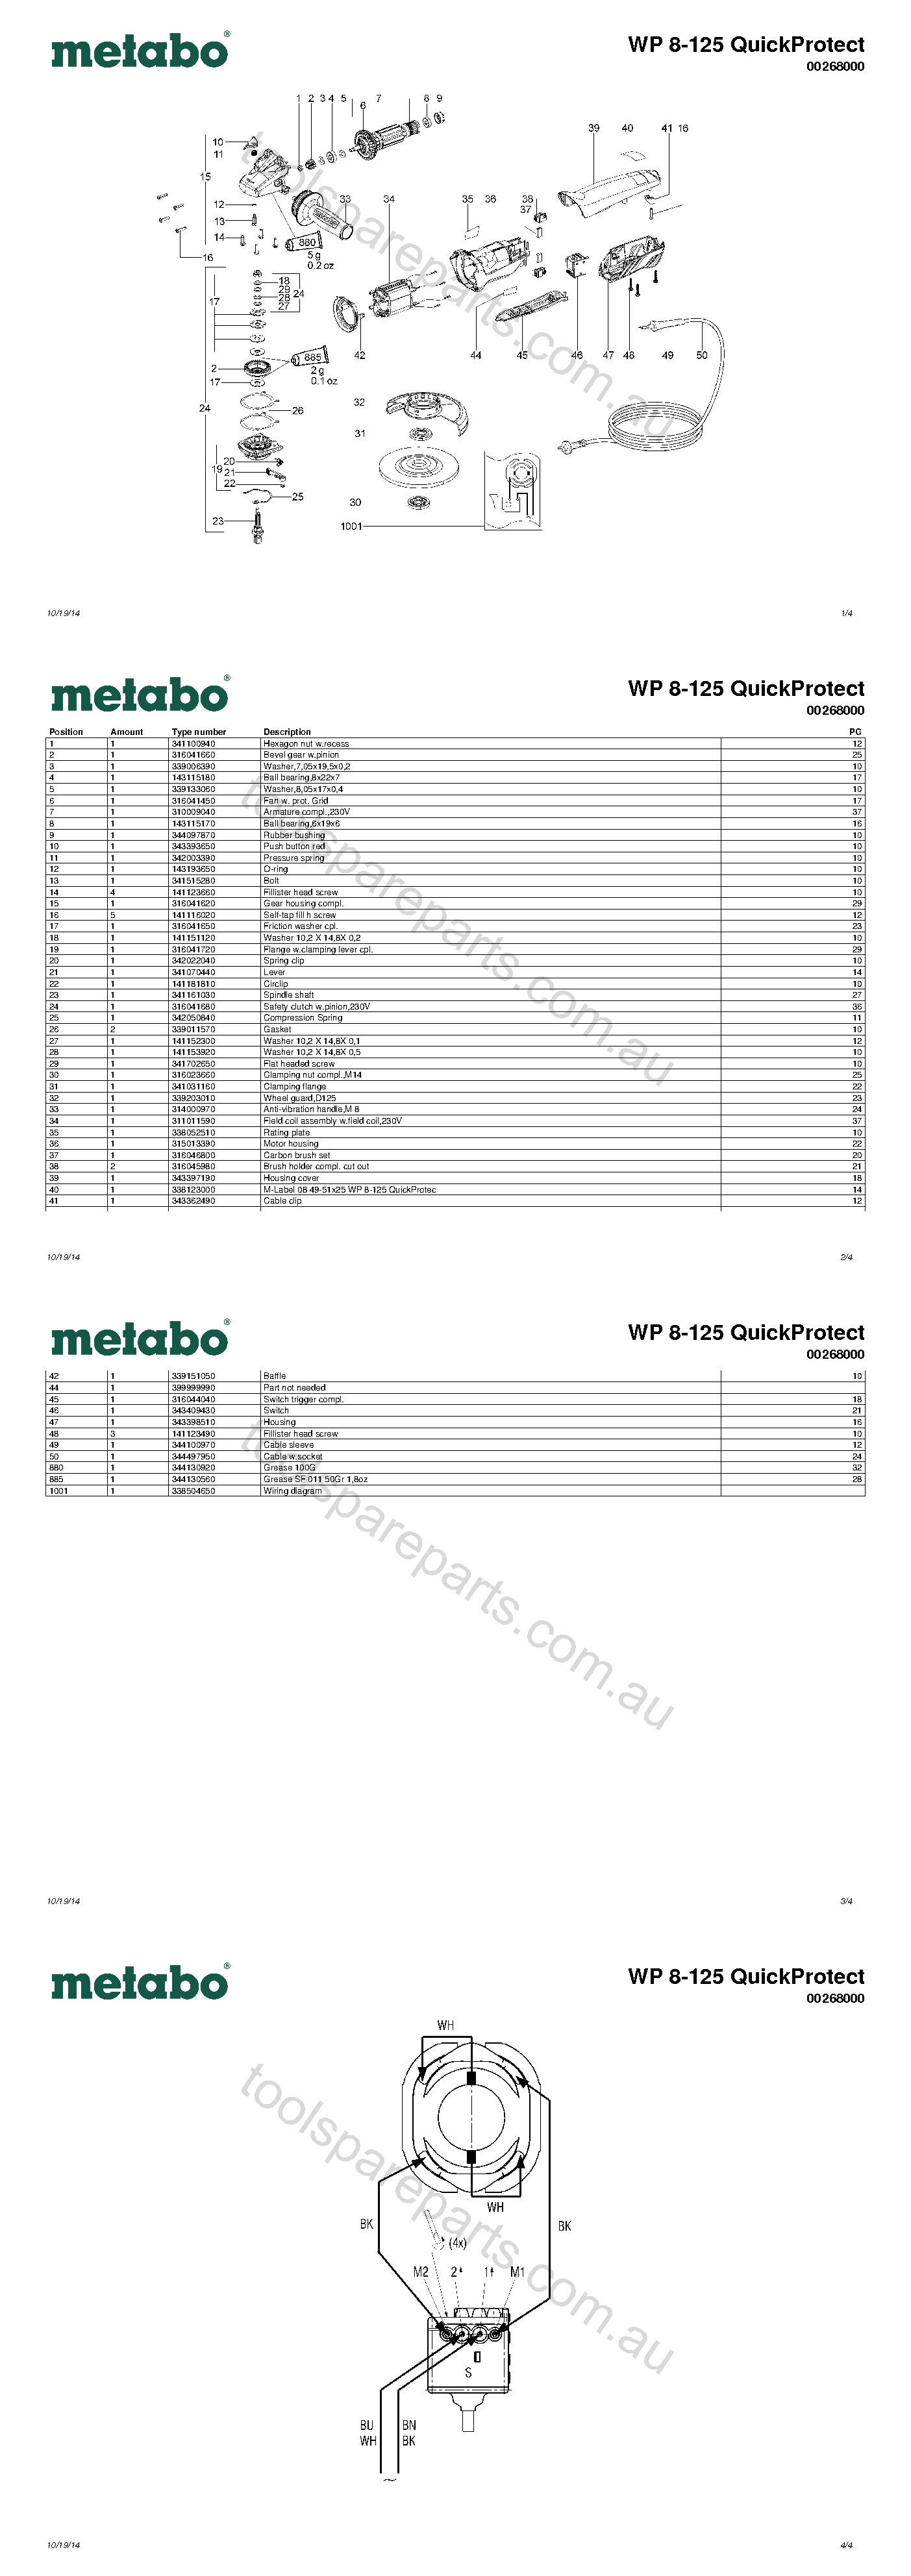 Metabo WP 8-125 QuickProtect 00268000  Diagram 1